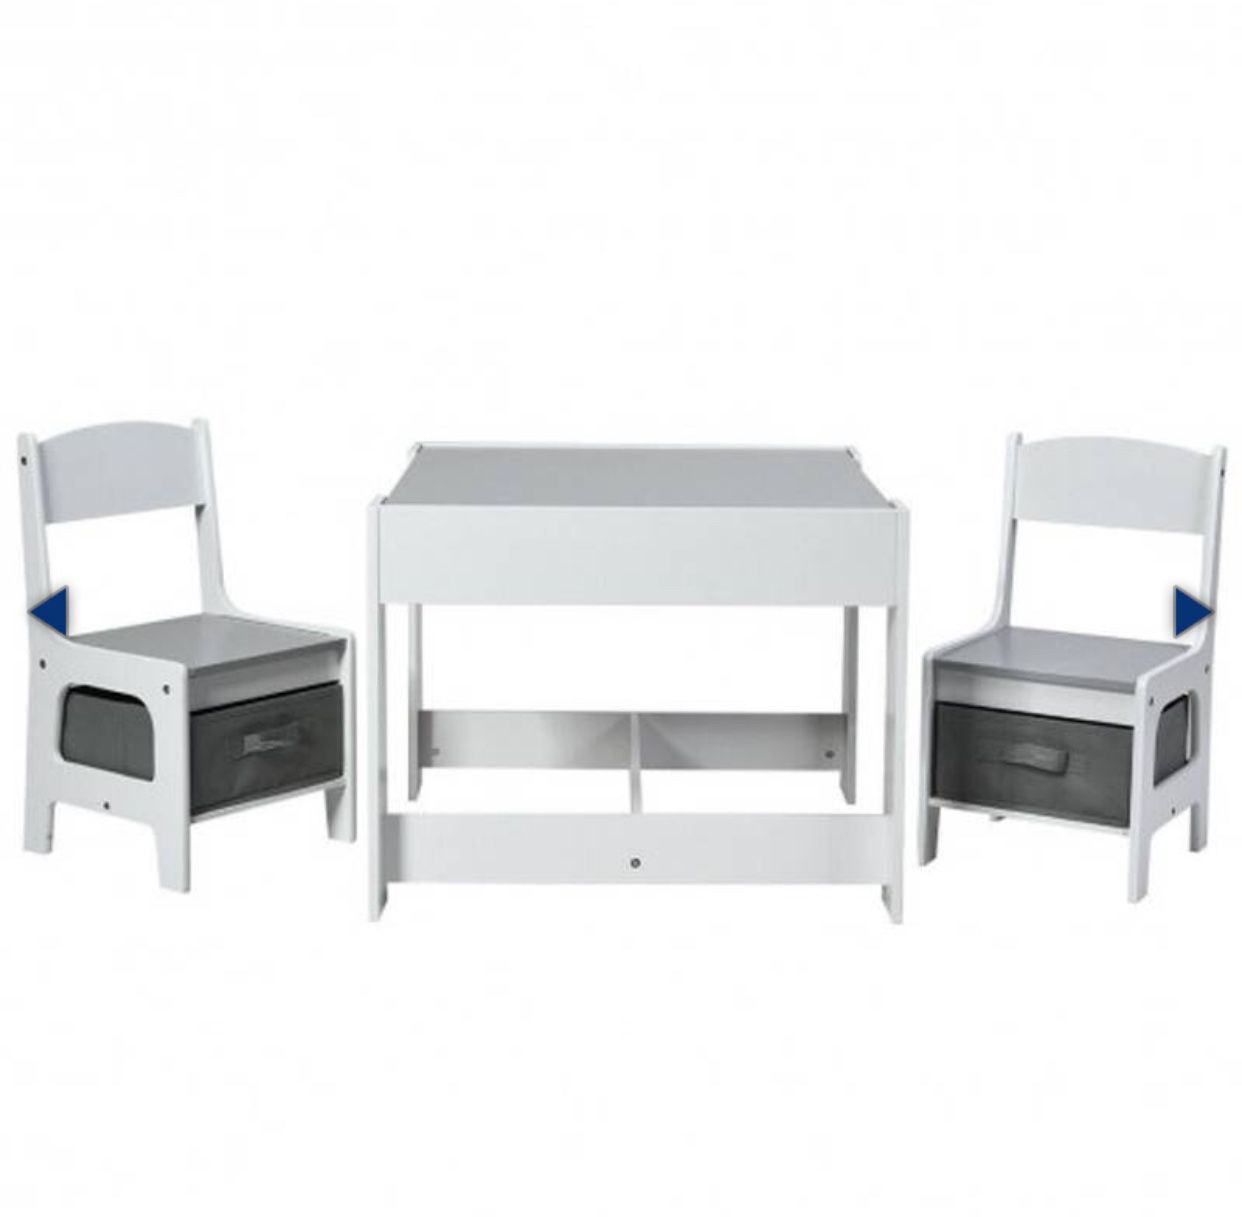 Children’s Activity Table With Table And Chair Storage